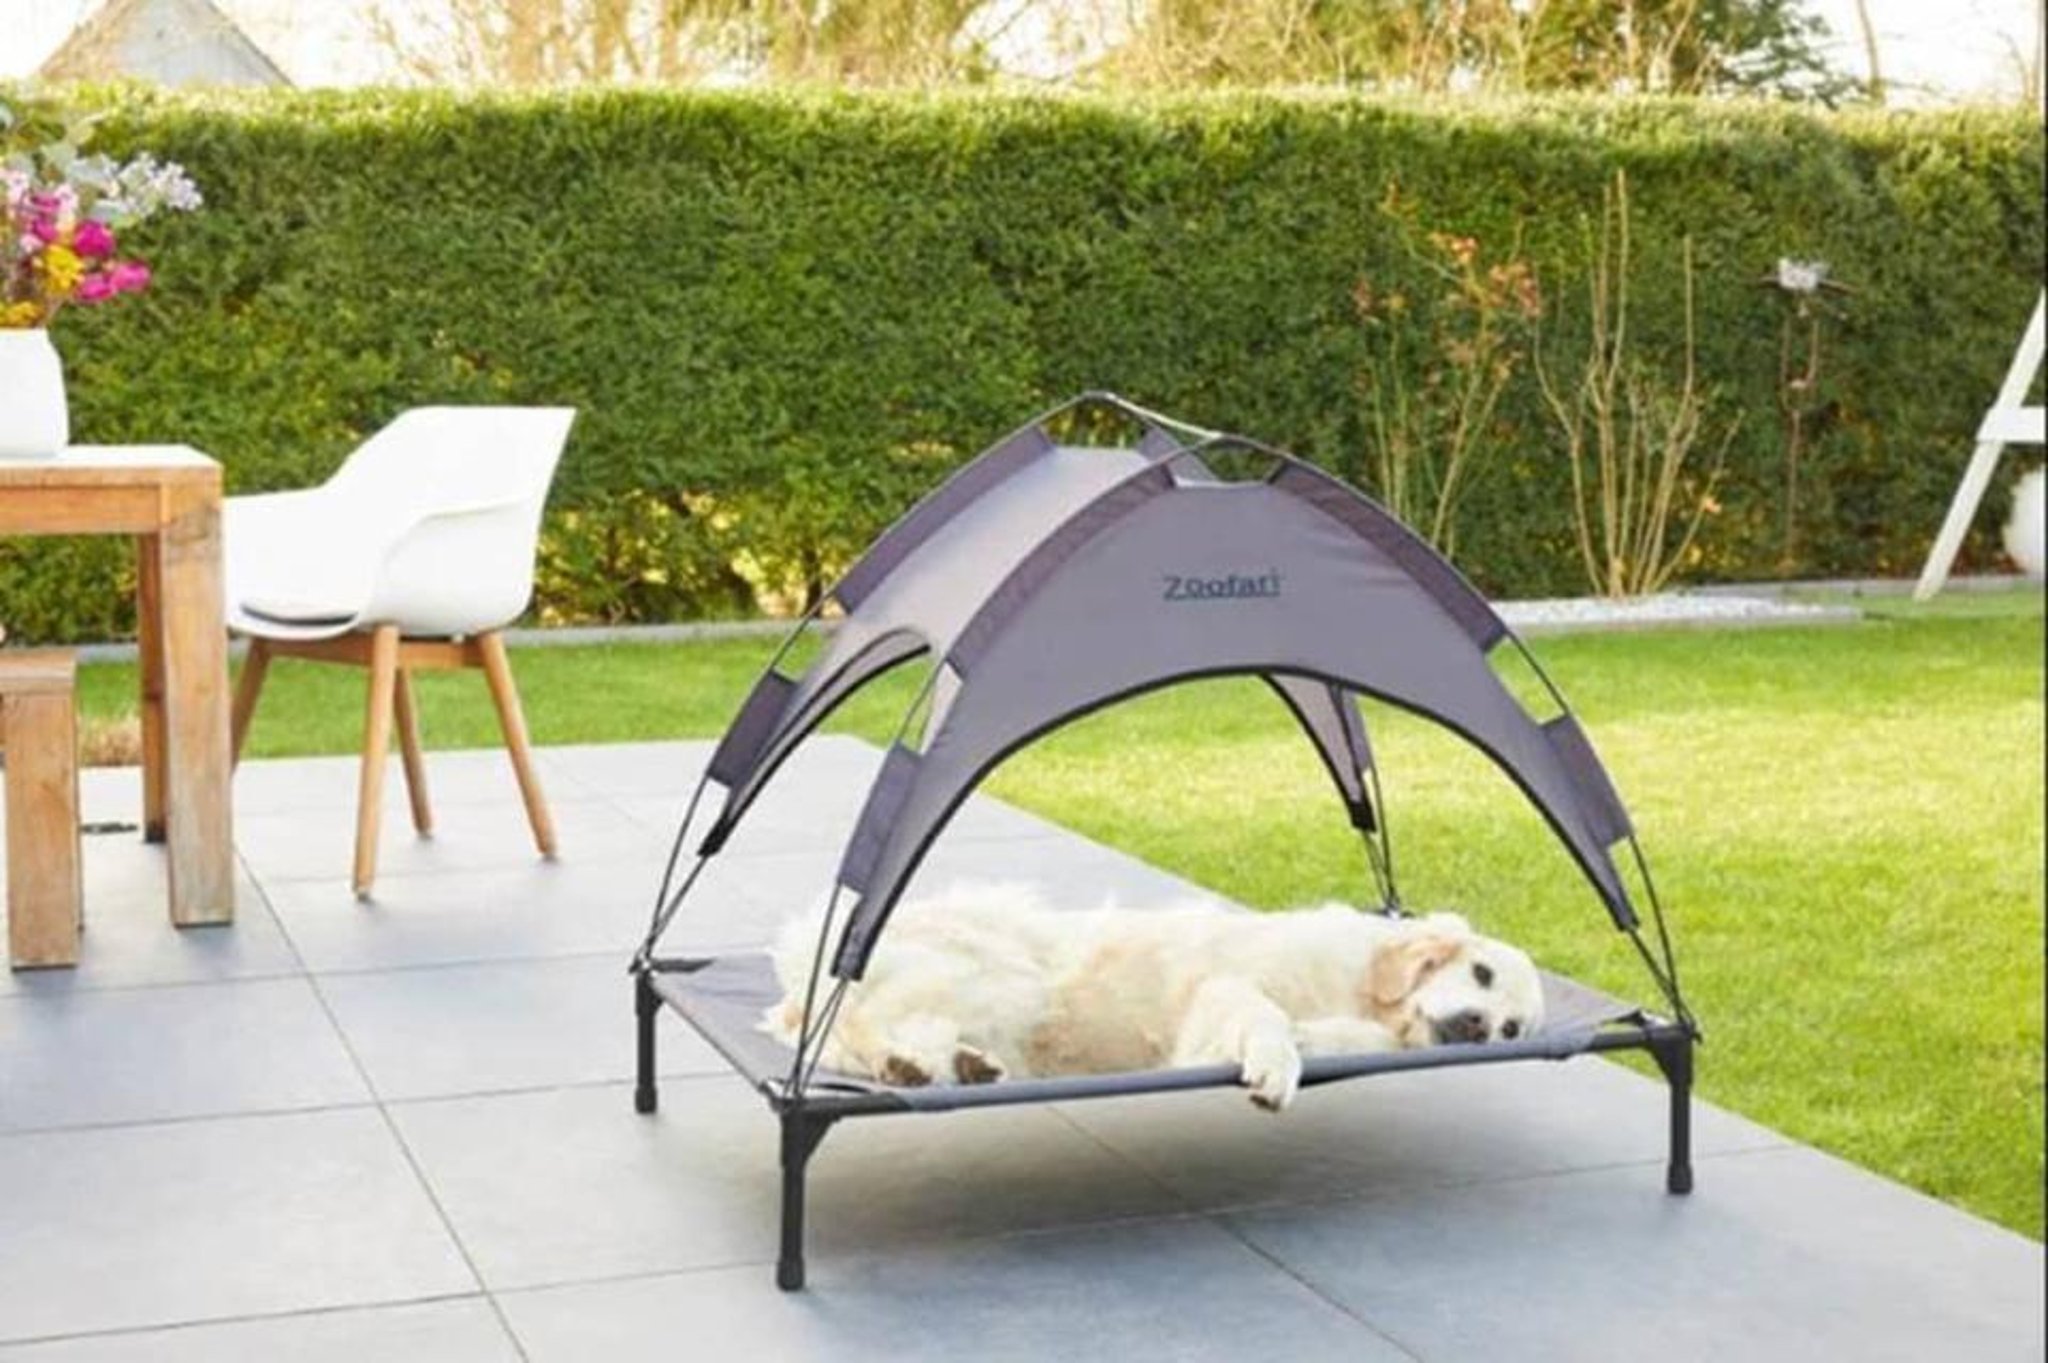 Franje Seminarie vaccinatie Lidl dog bed: everything about the Zoofari outdoor dog bed with sun shade -  and other items to keep your pet cool this summer | The Star